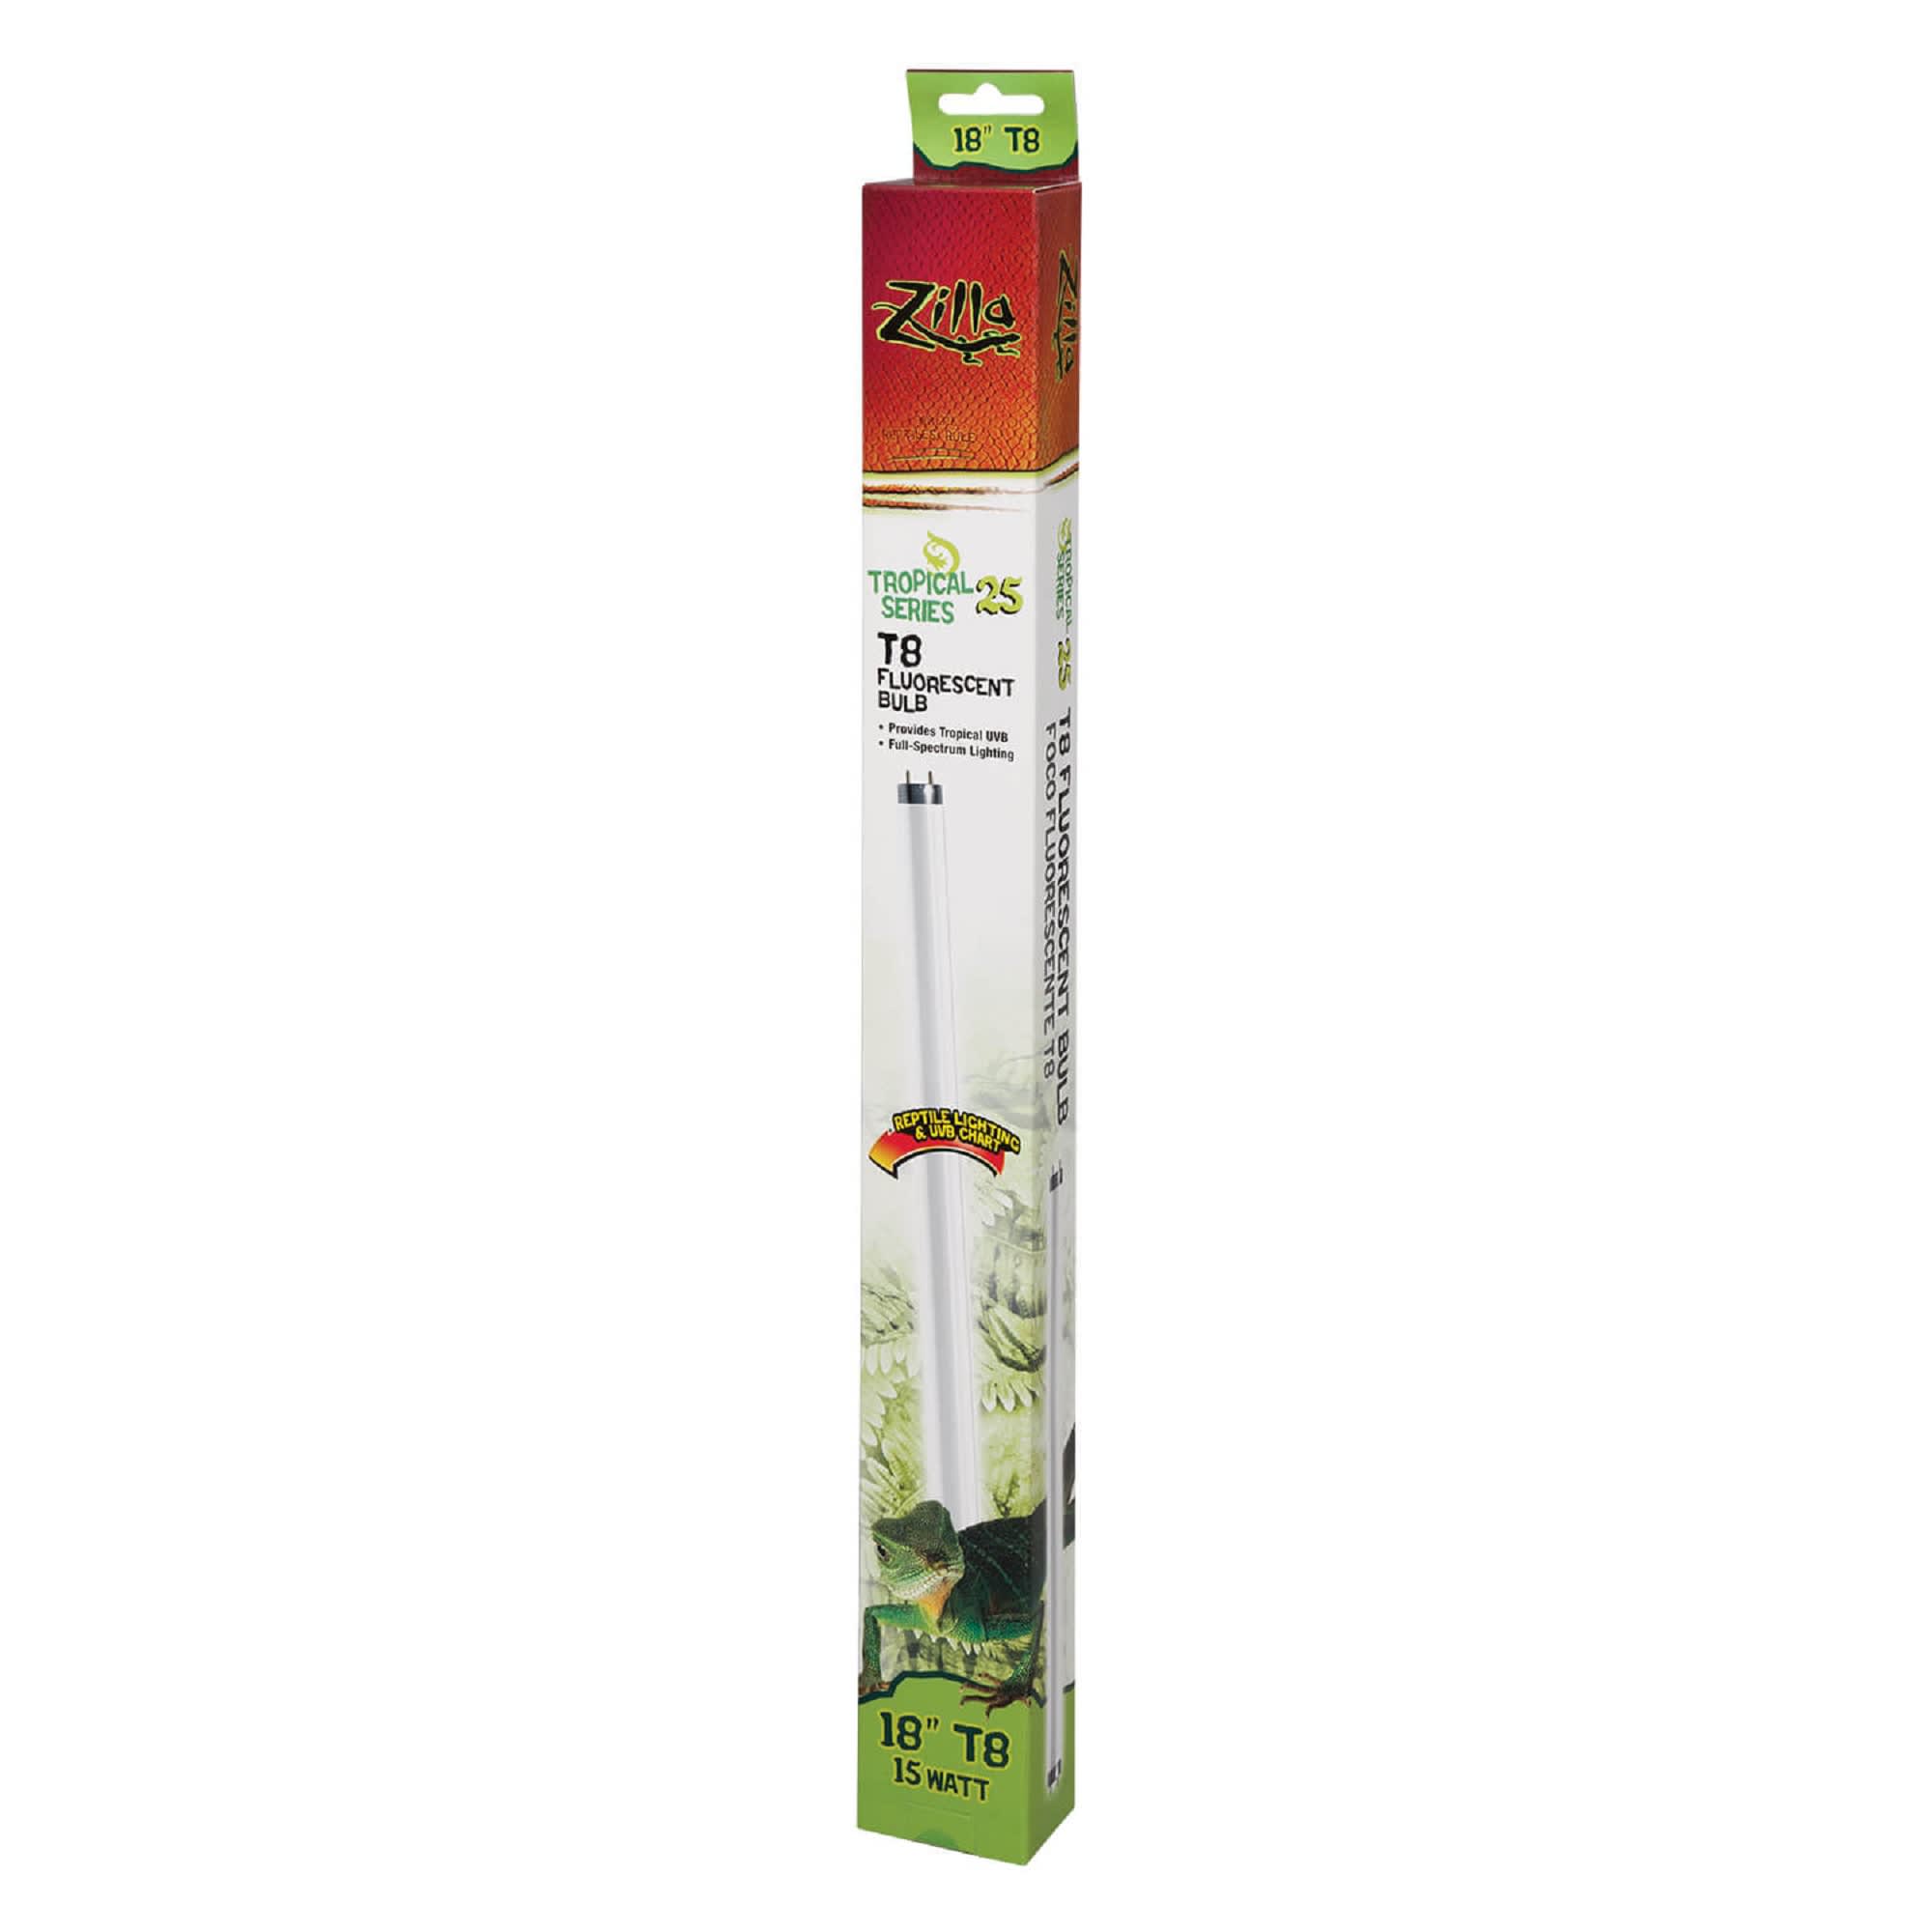 Photos - Other for Aquariums Zilla Tropical 25 UVB Fluorescent T8 Bulb, 15 Watts, 15 W / 18 IN 10 